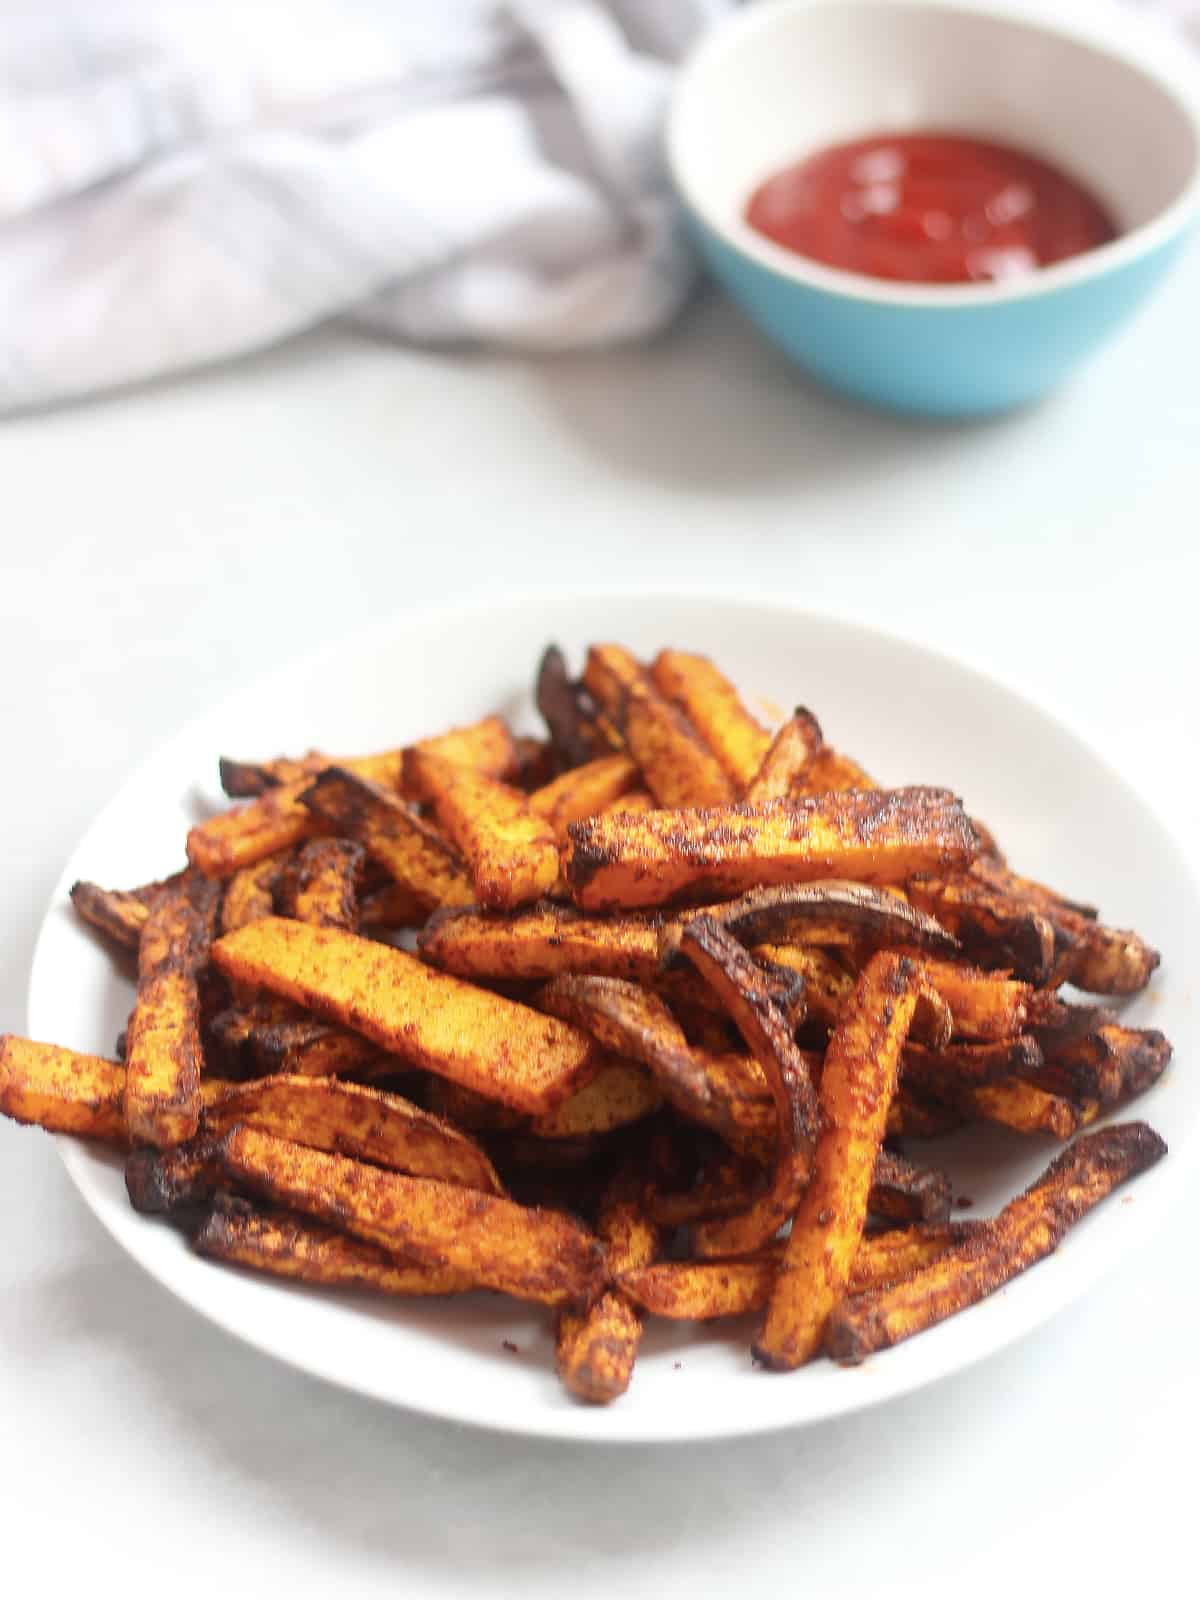 Vegetable fries with paprika on a white plate.